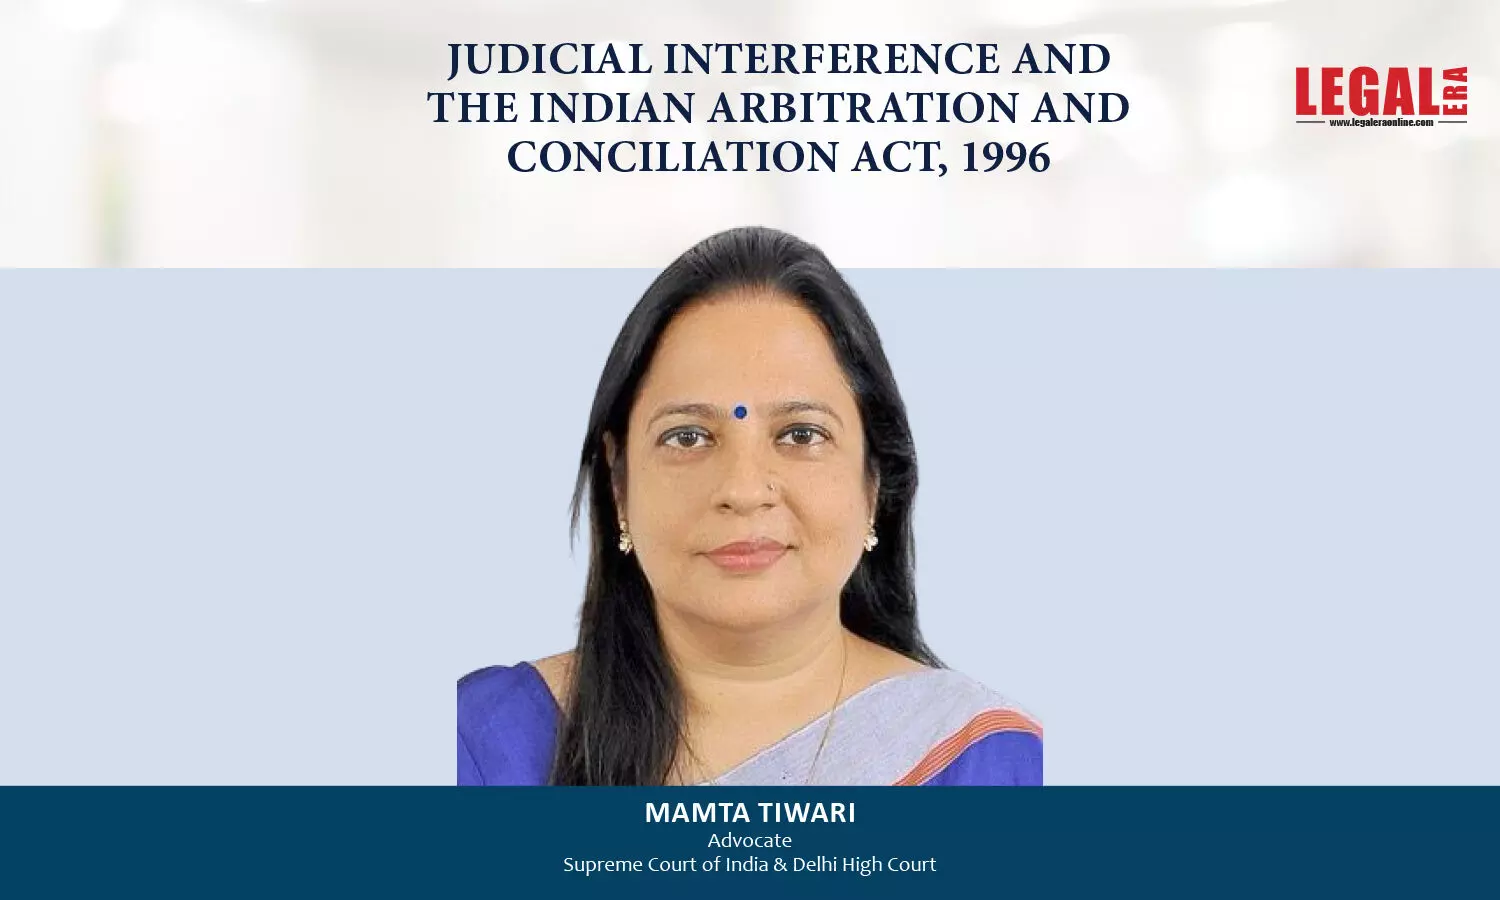 Judicial Interference And The Indian Arbitration And Conciliation Act, 1996